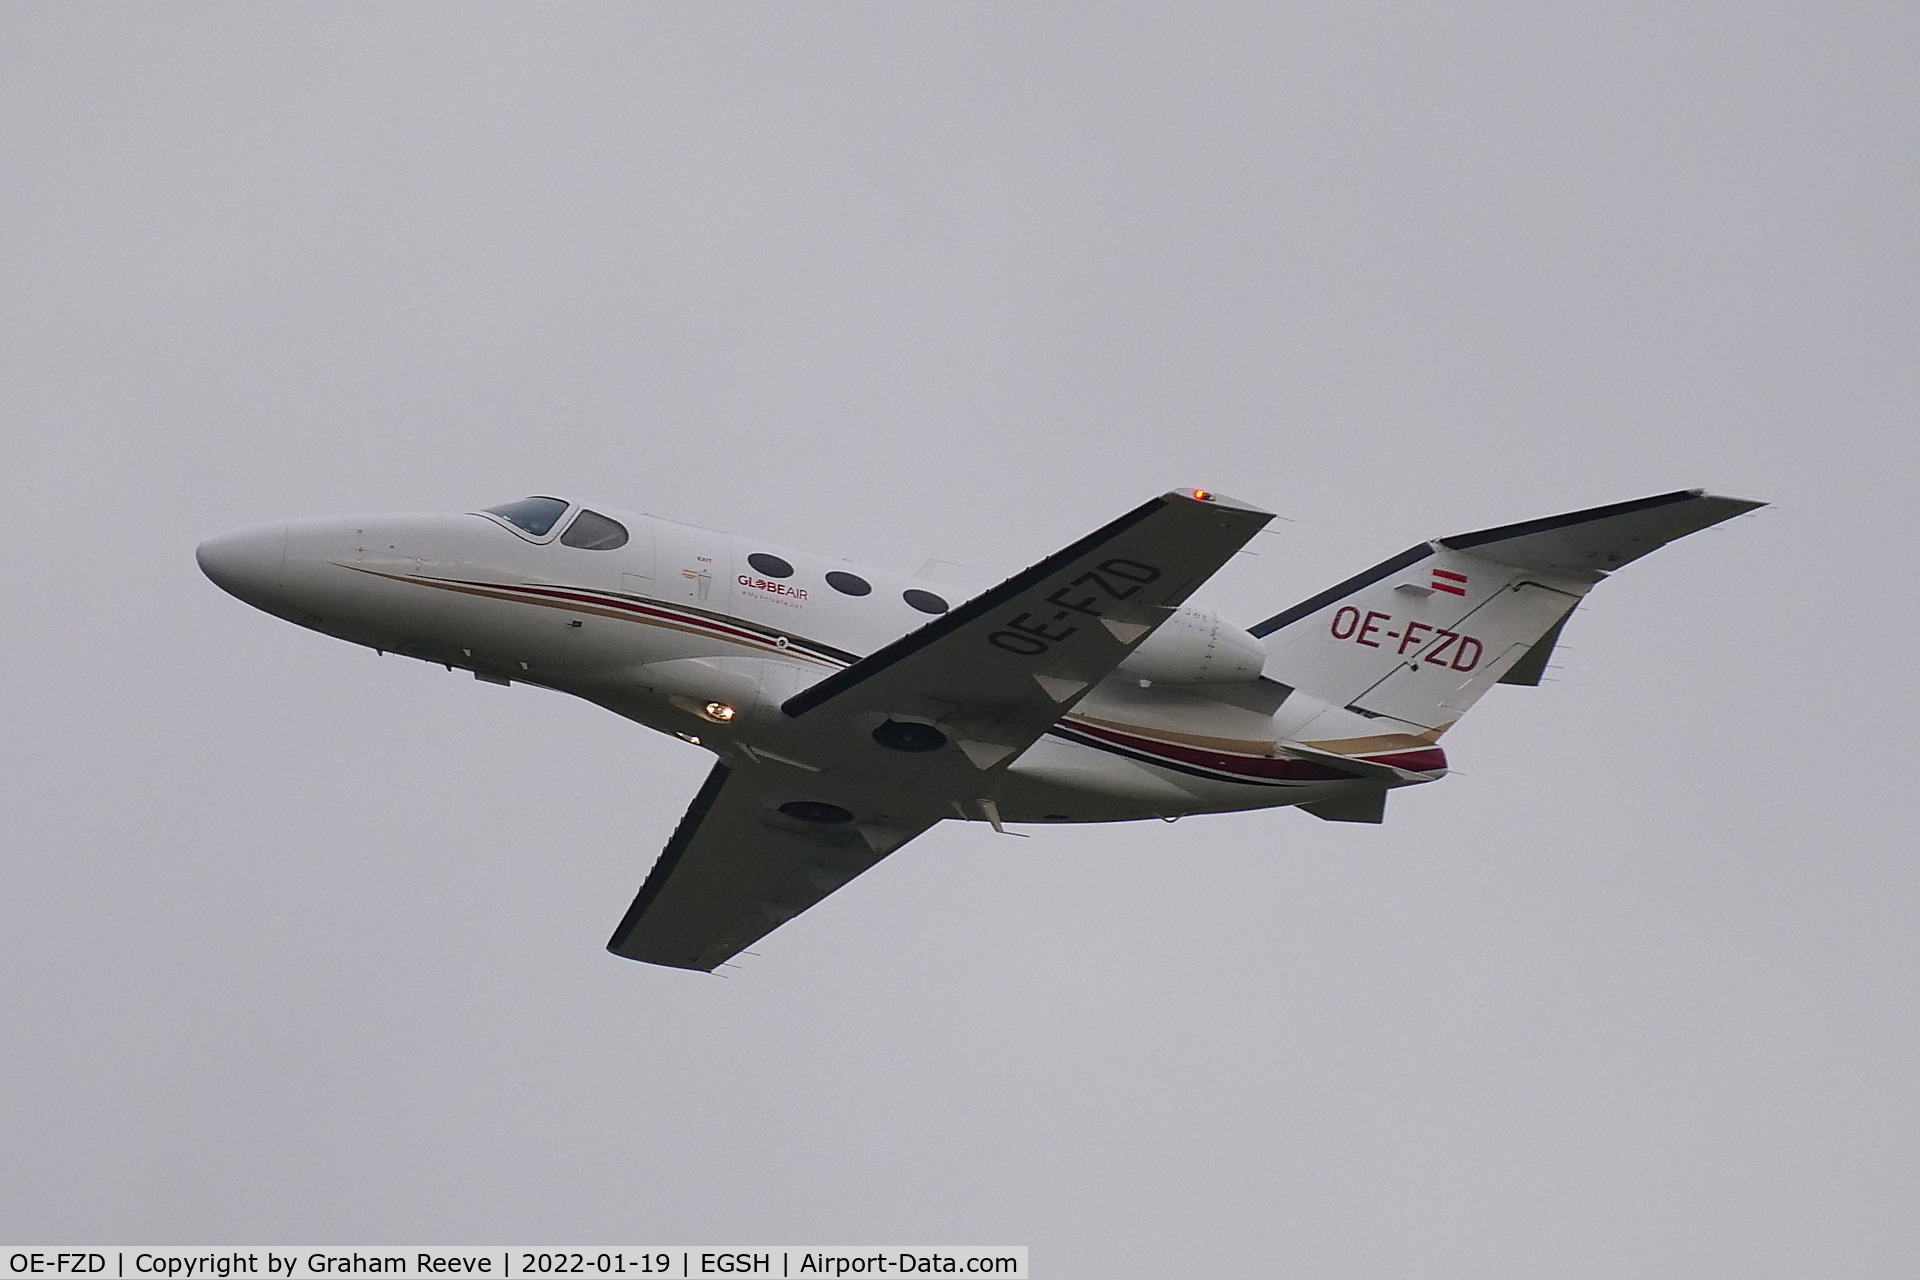 OE-FZD, 2009 Cessna 510 Citation Mustang Citation Mustang C/N 510-0216, Departing from Norwich.